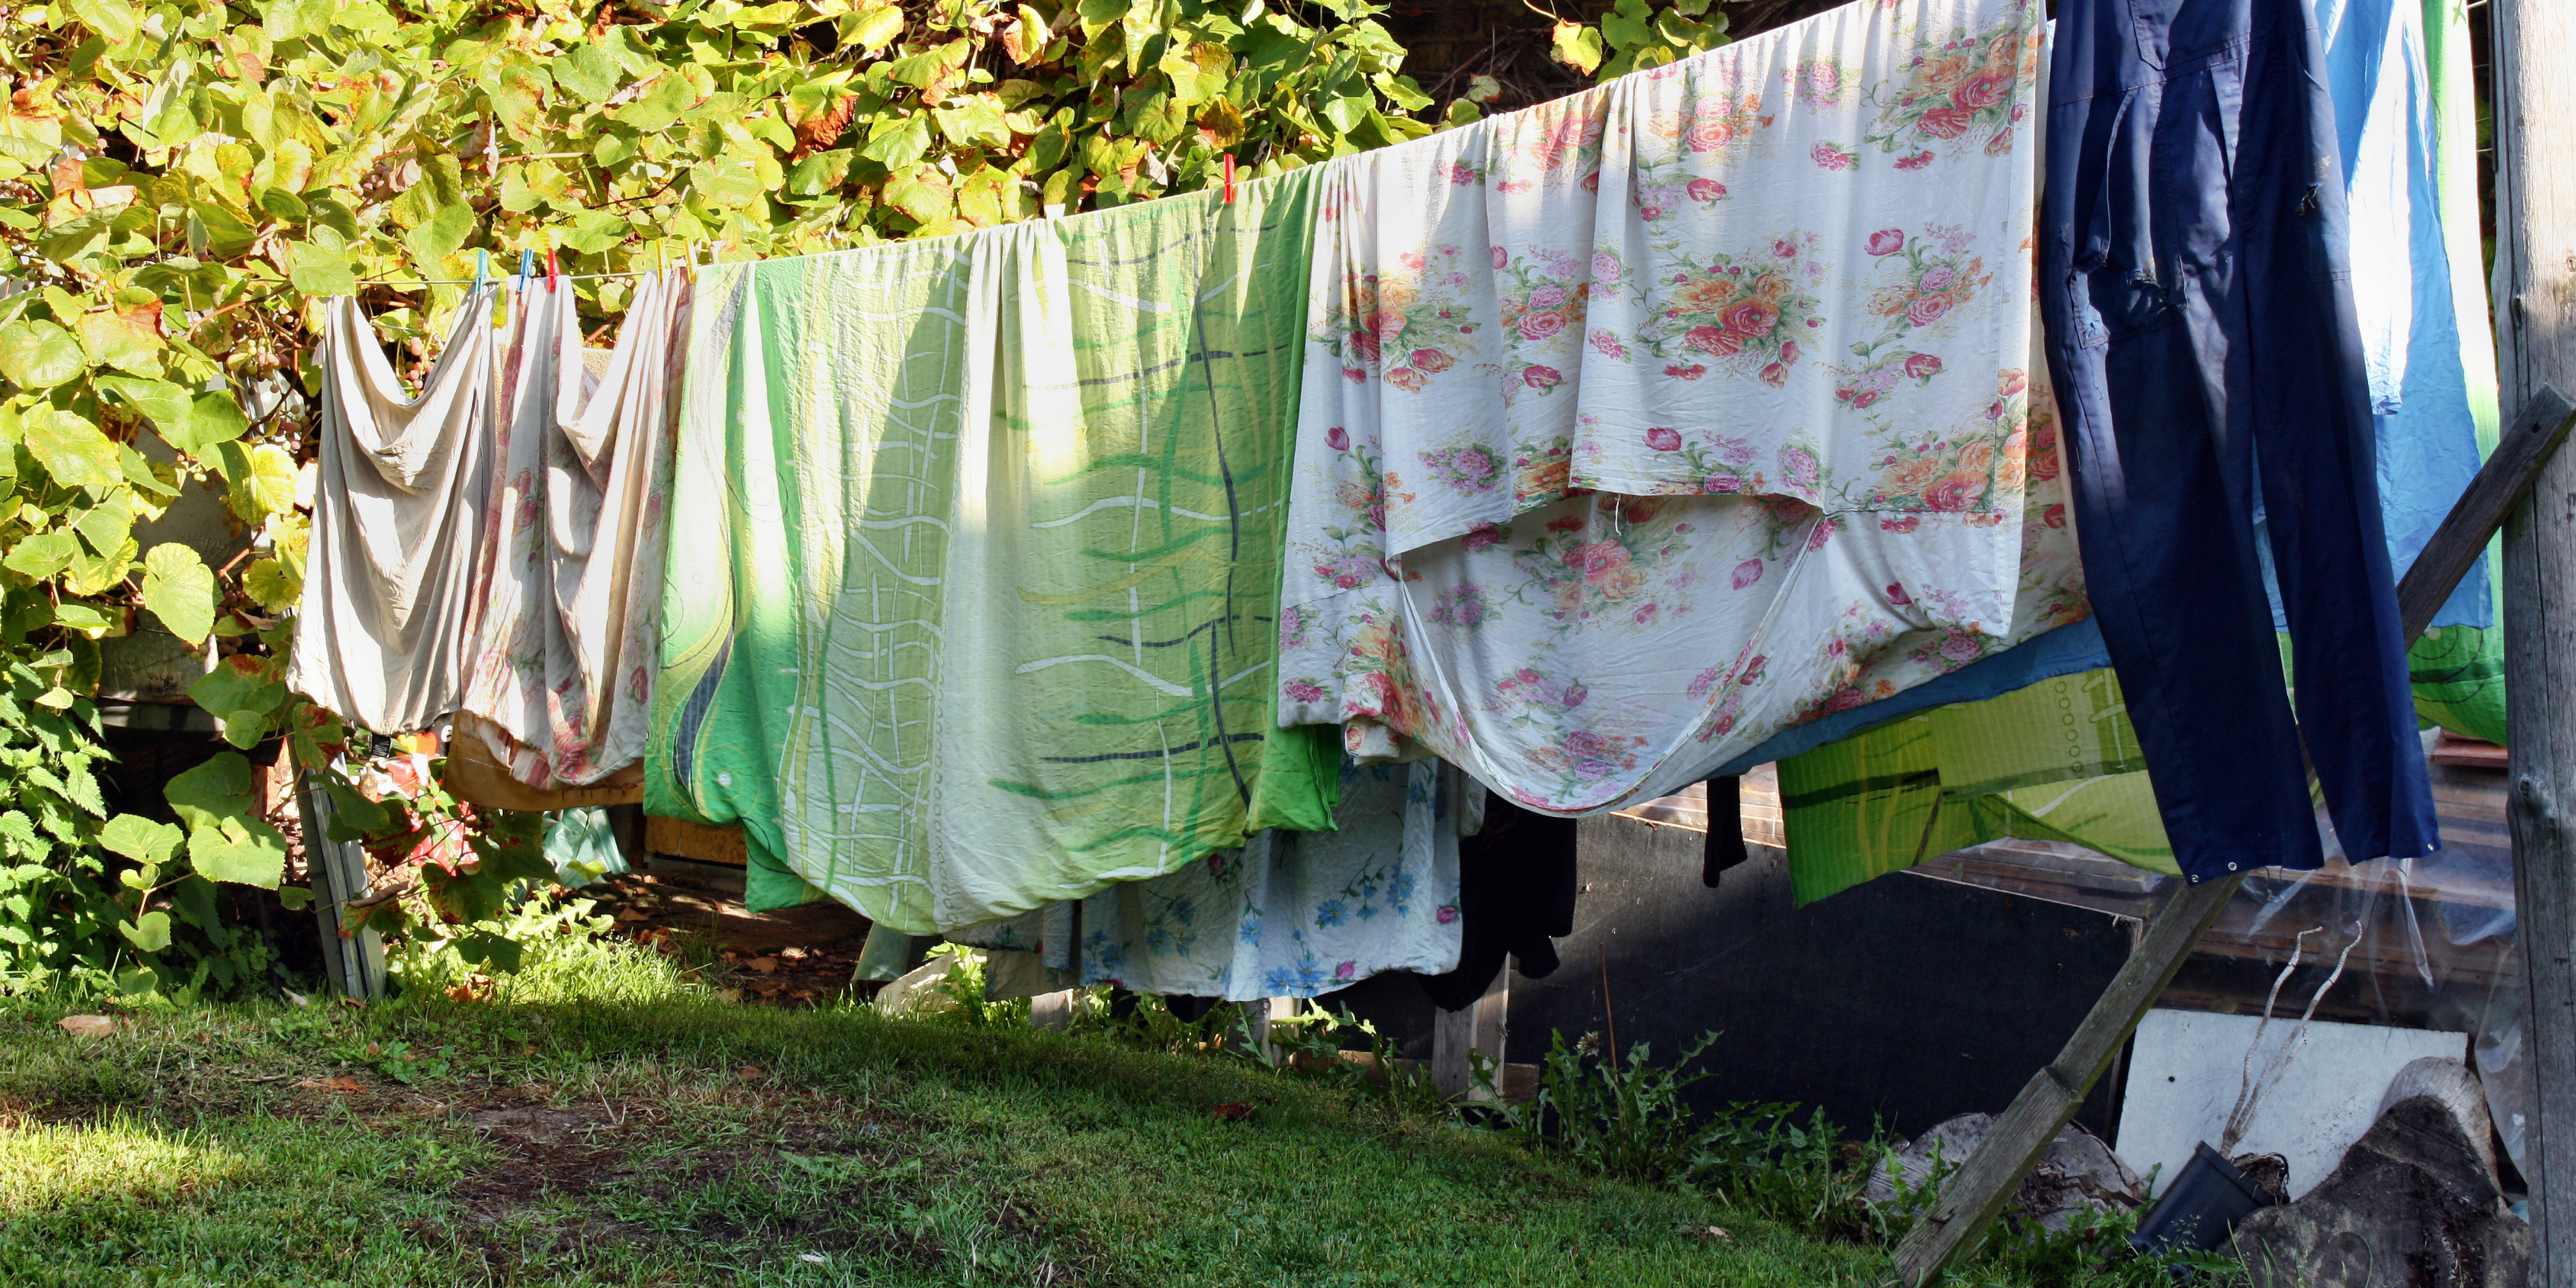 Making Your Laundry Day Eco-Friendly